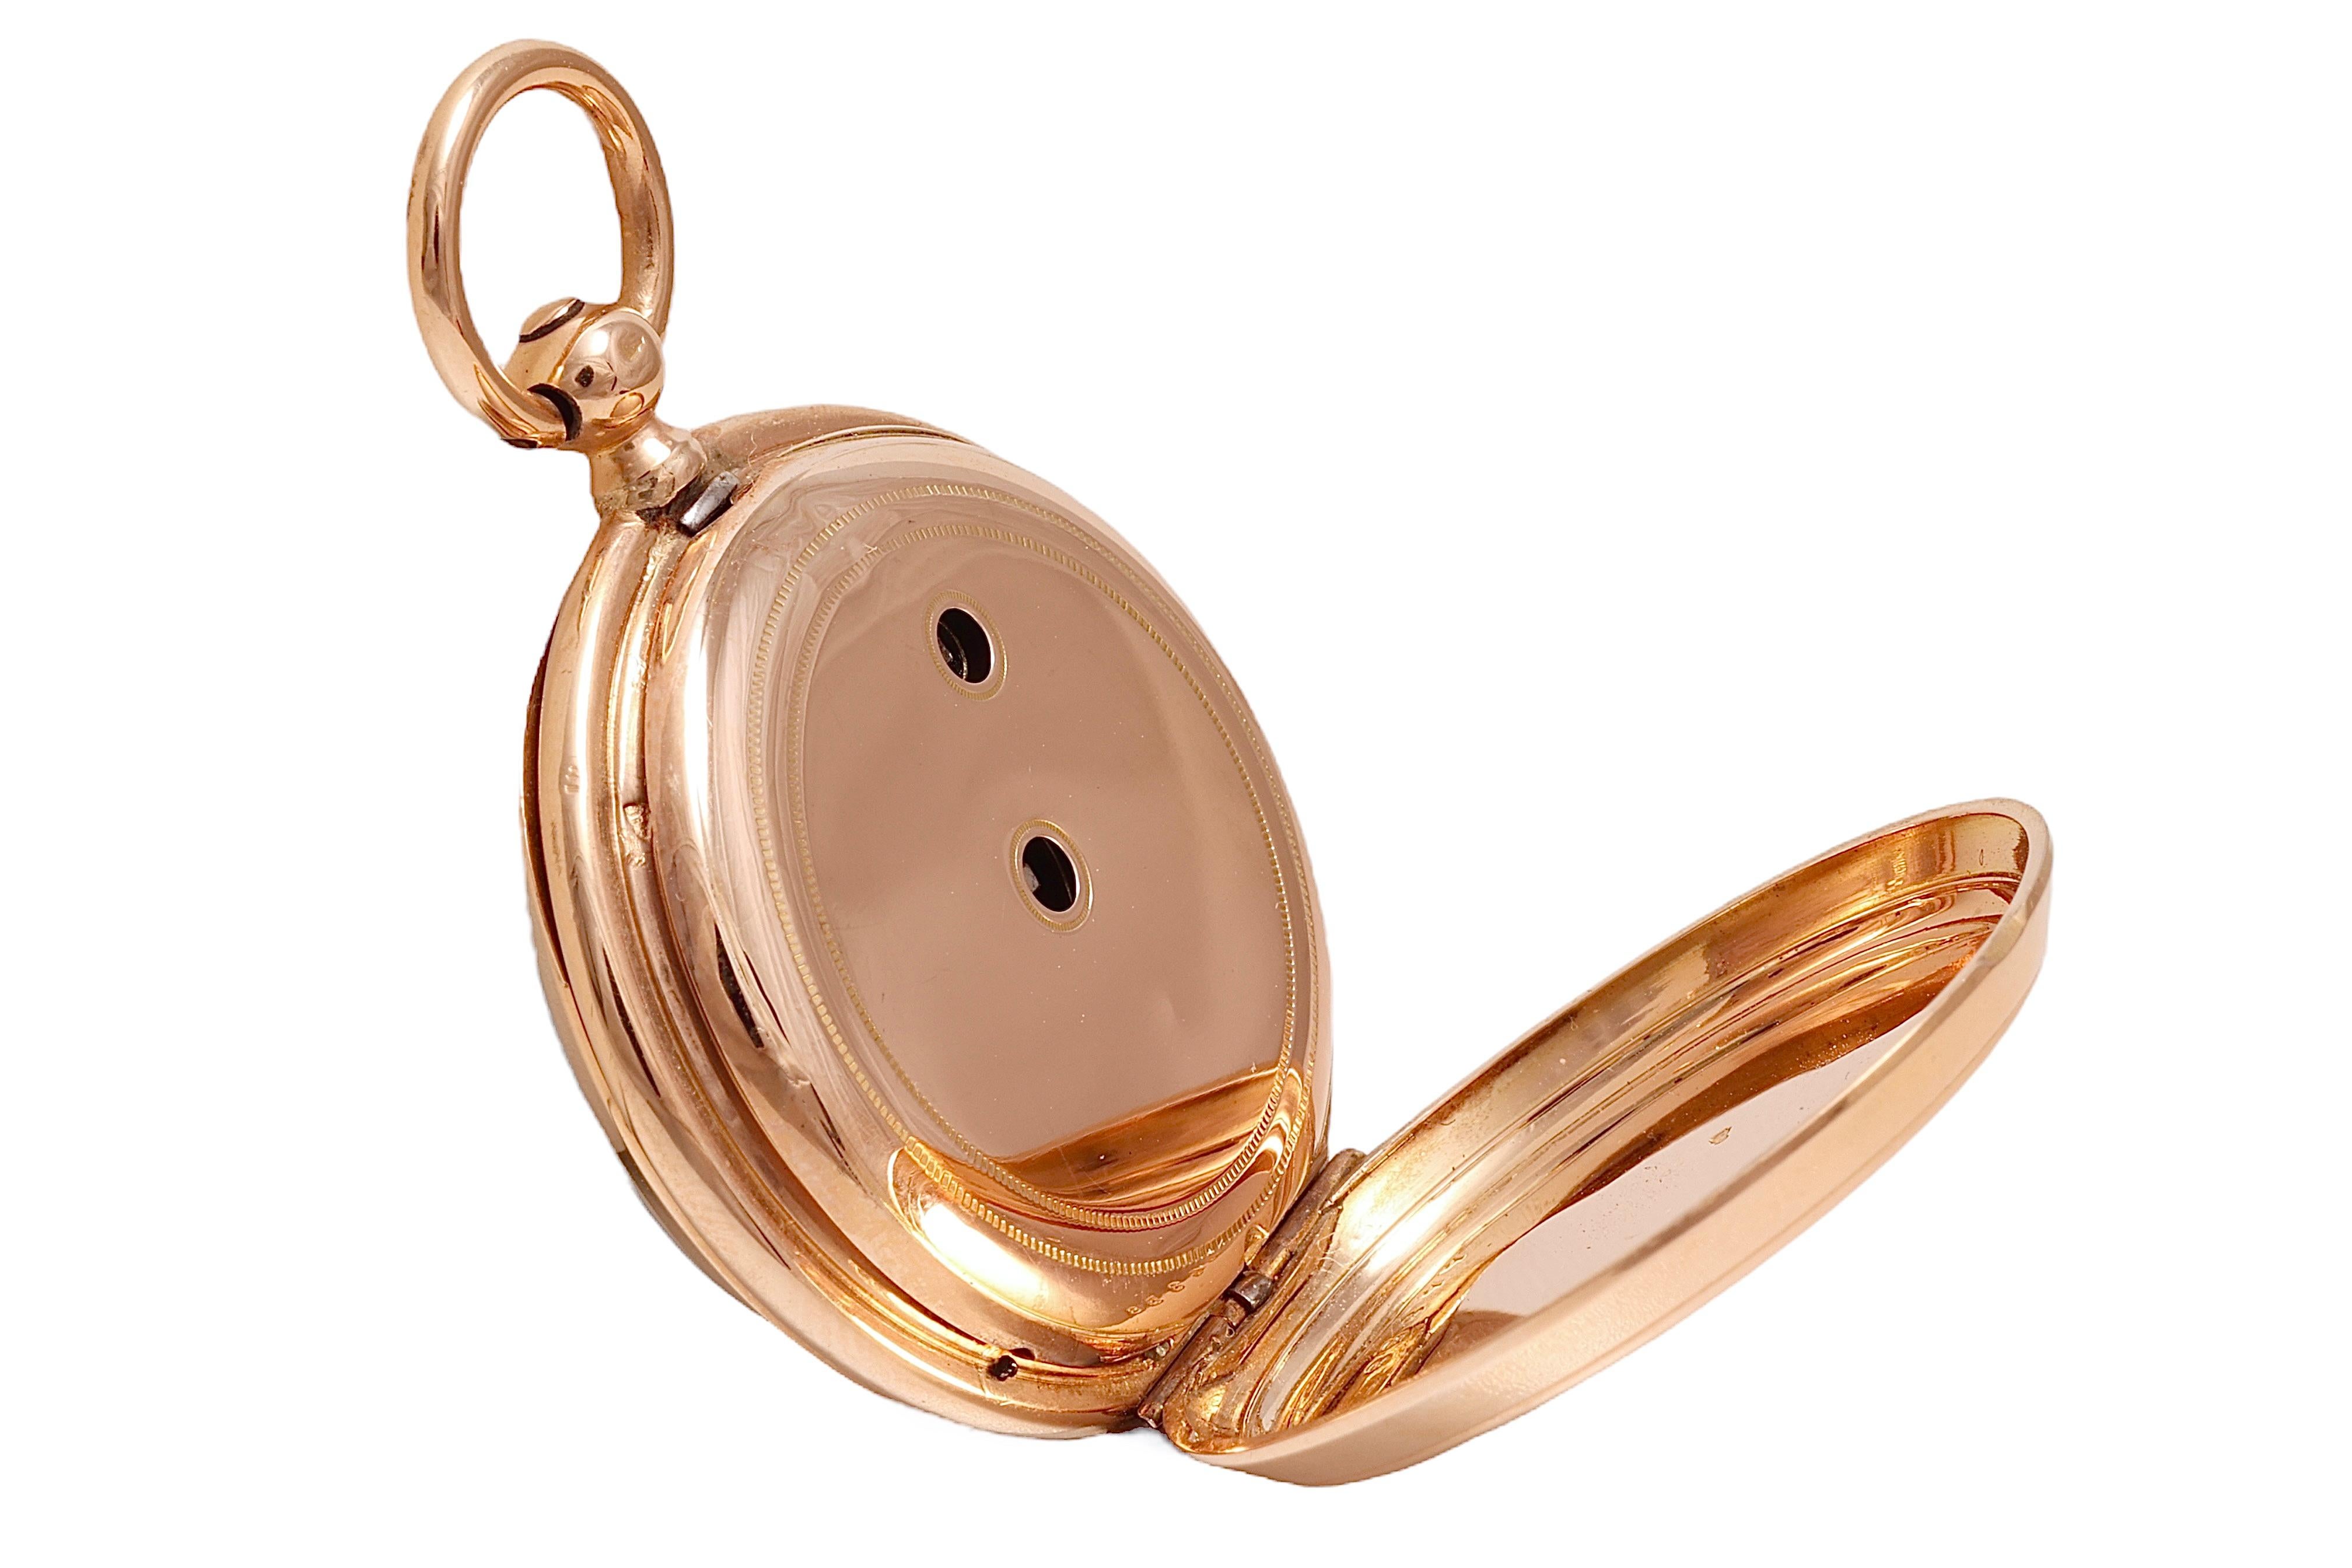 14 Kt Solid Pink Gold Delaunay Chauveau Ruffec pocket watch For Sale 1